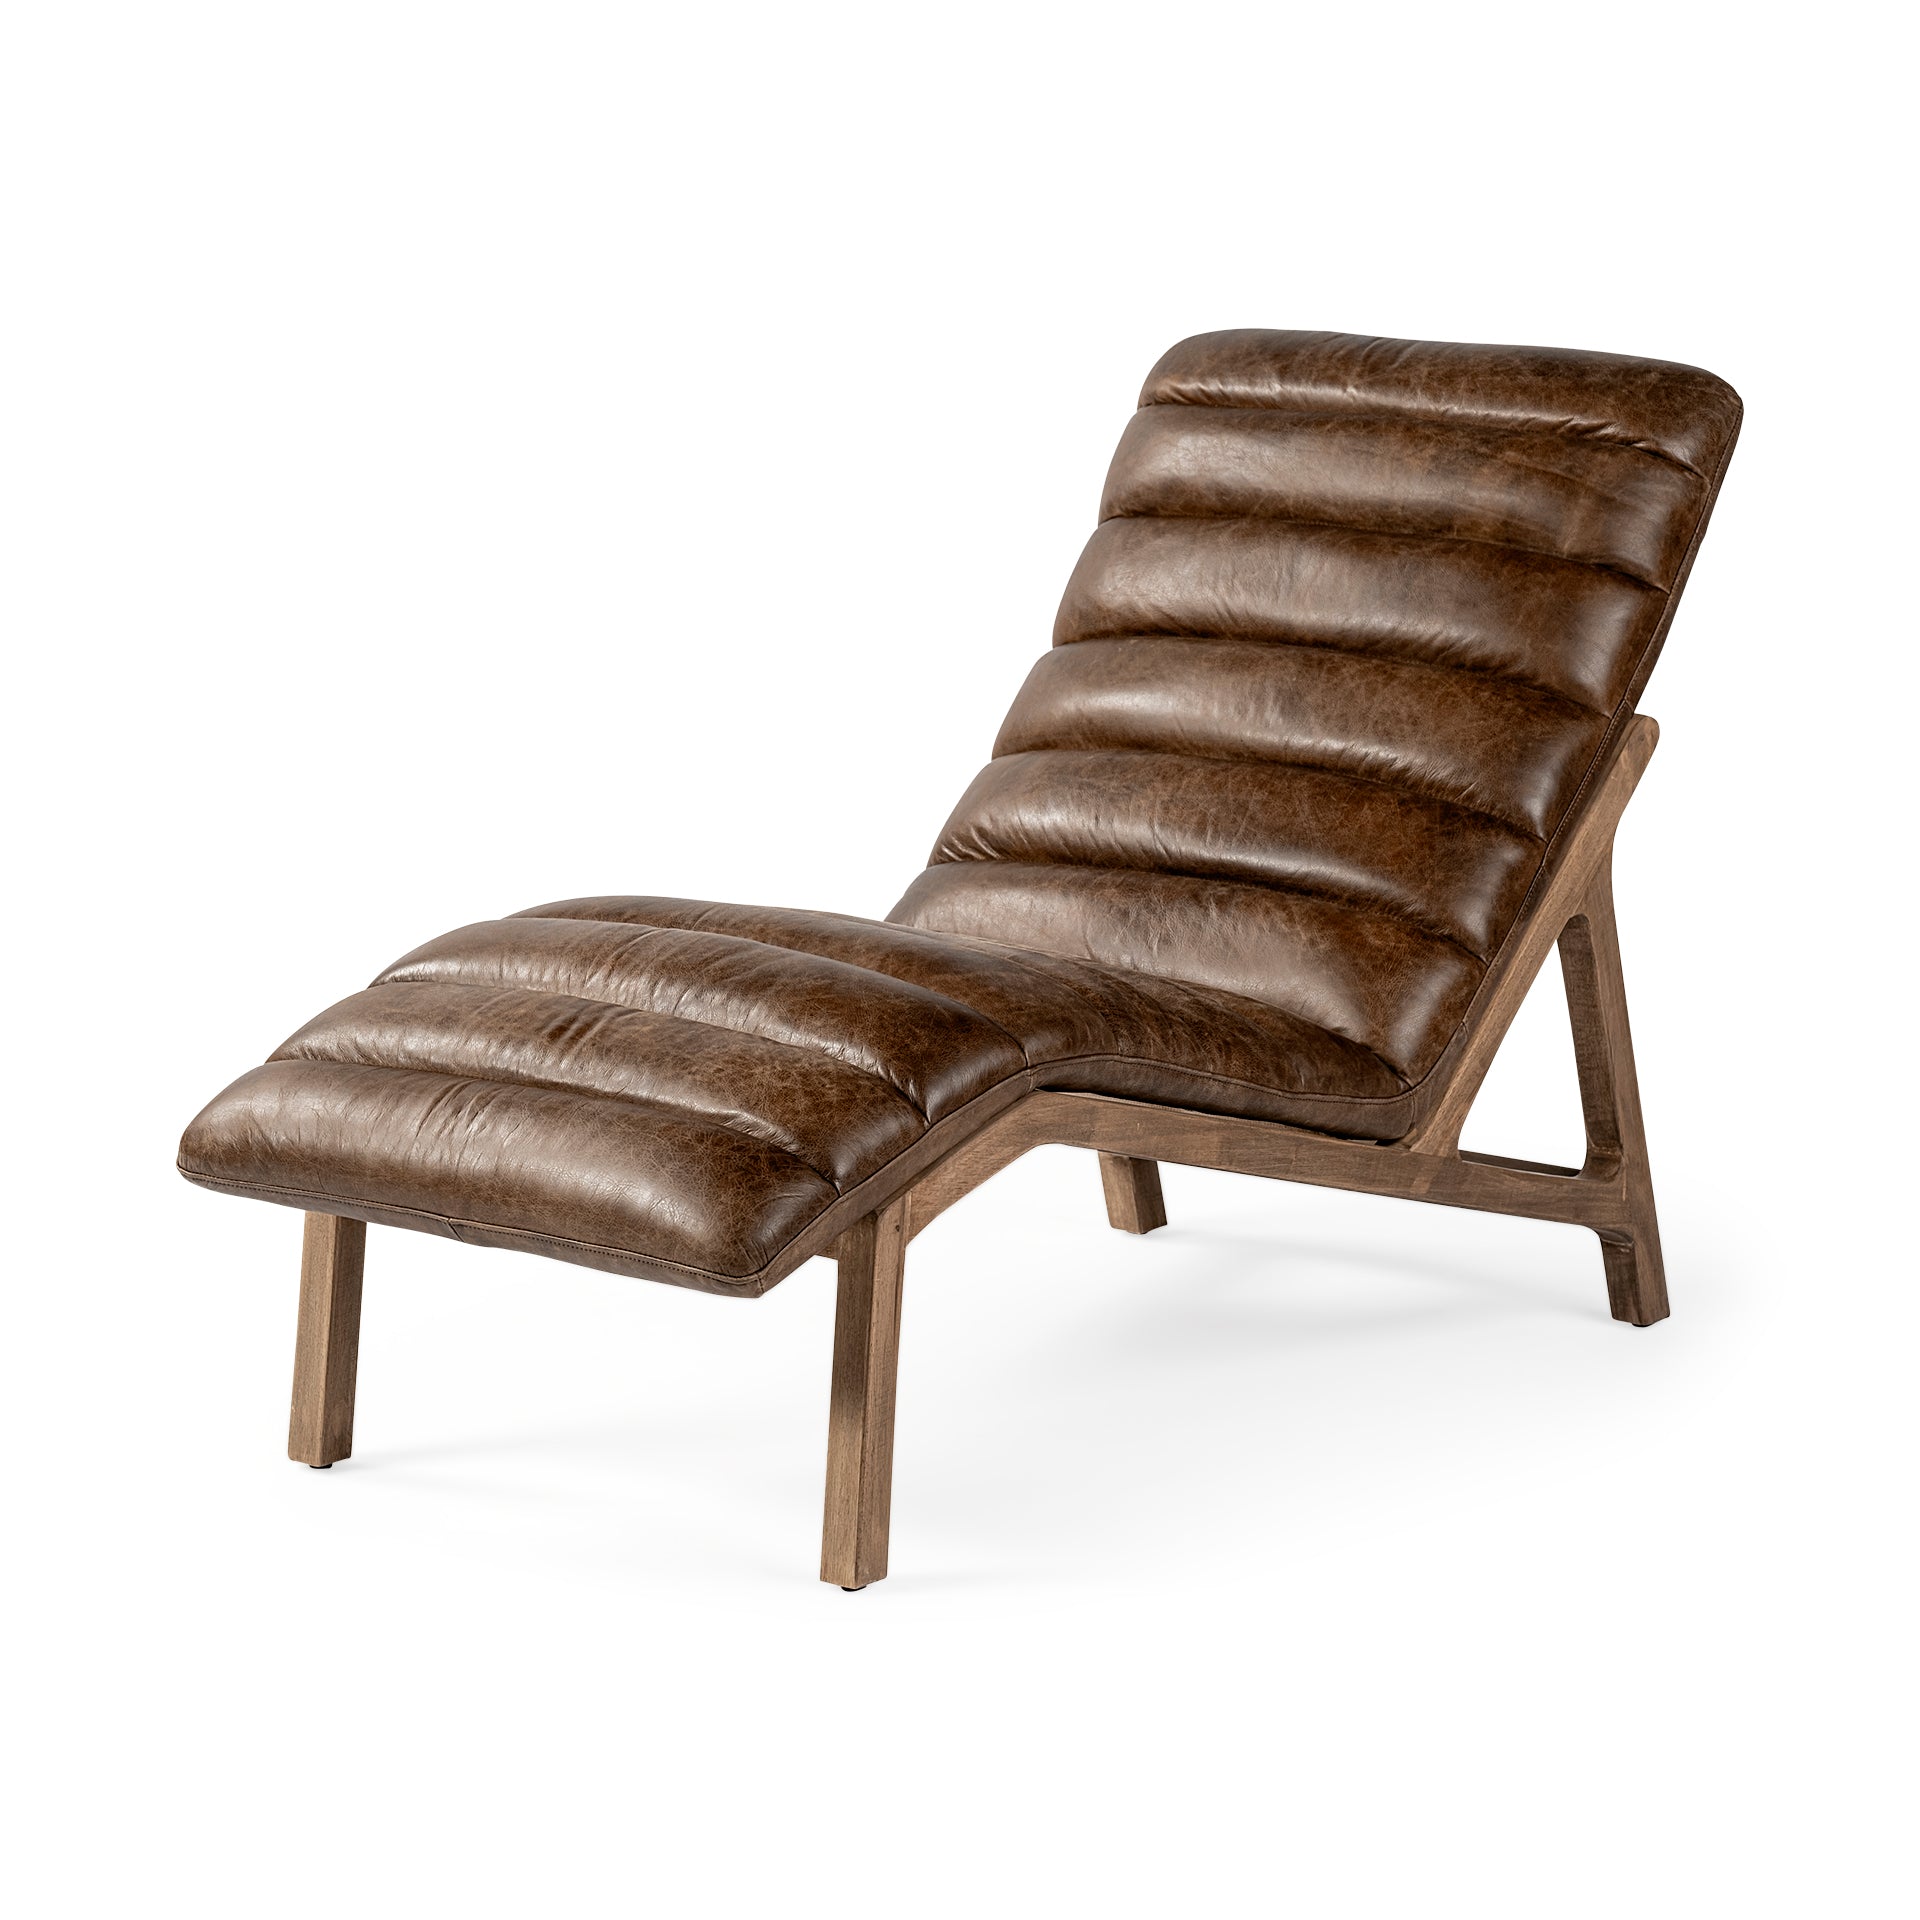 Leather Lounge Chair for sale, Restoration Hardware Leather Lounge Chair